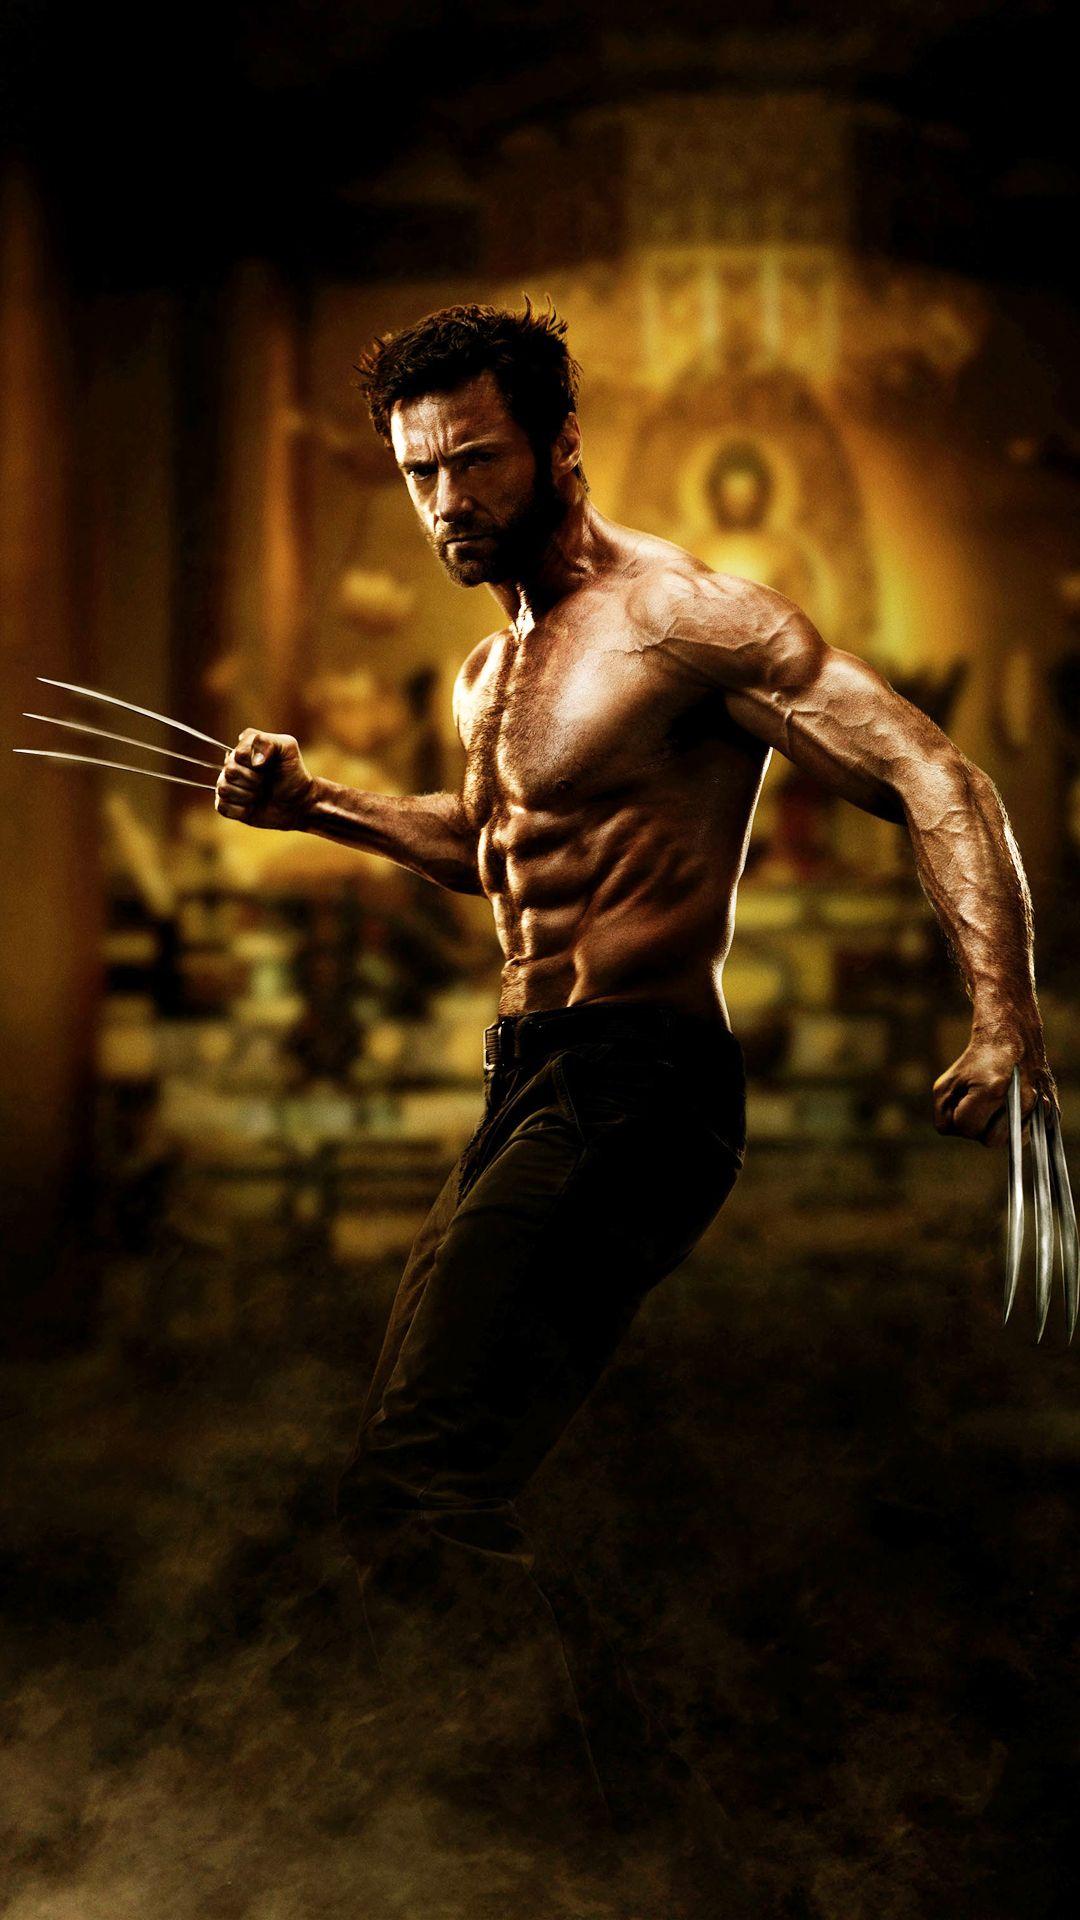 WolverineK wallpaper, free and easy to download